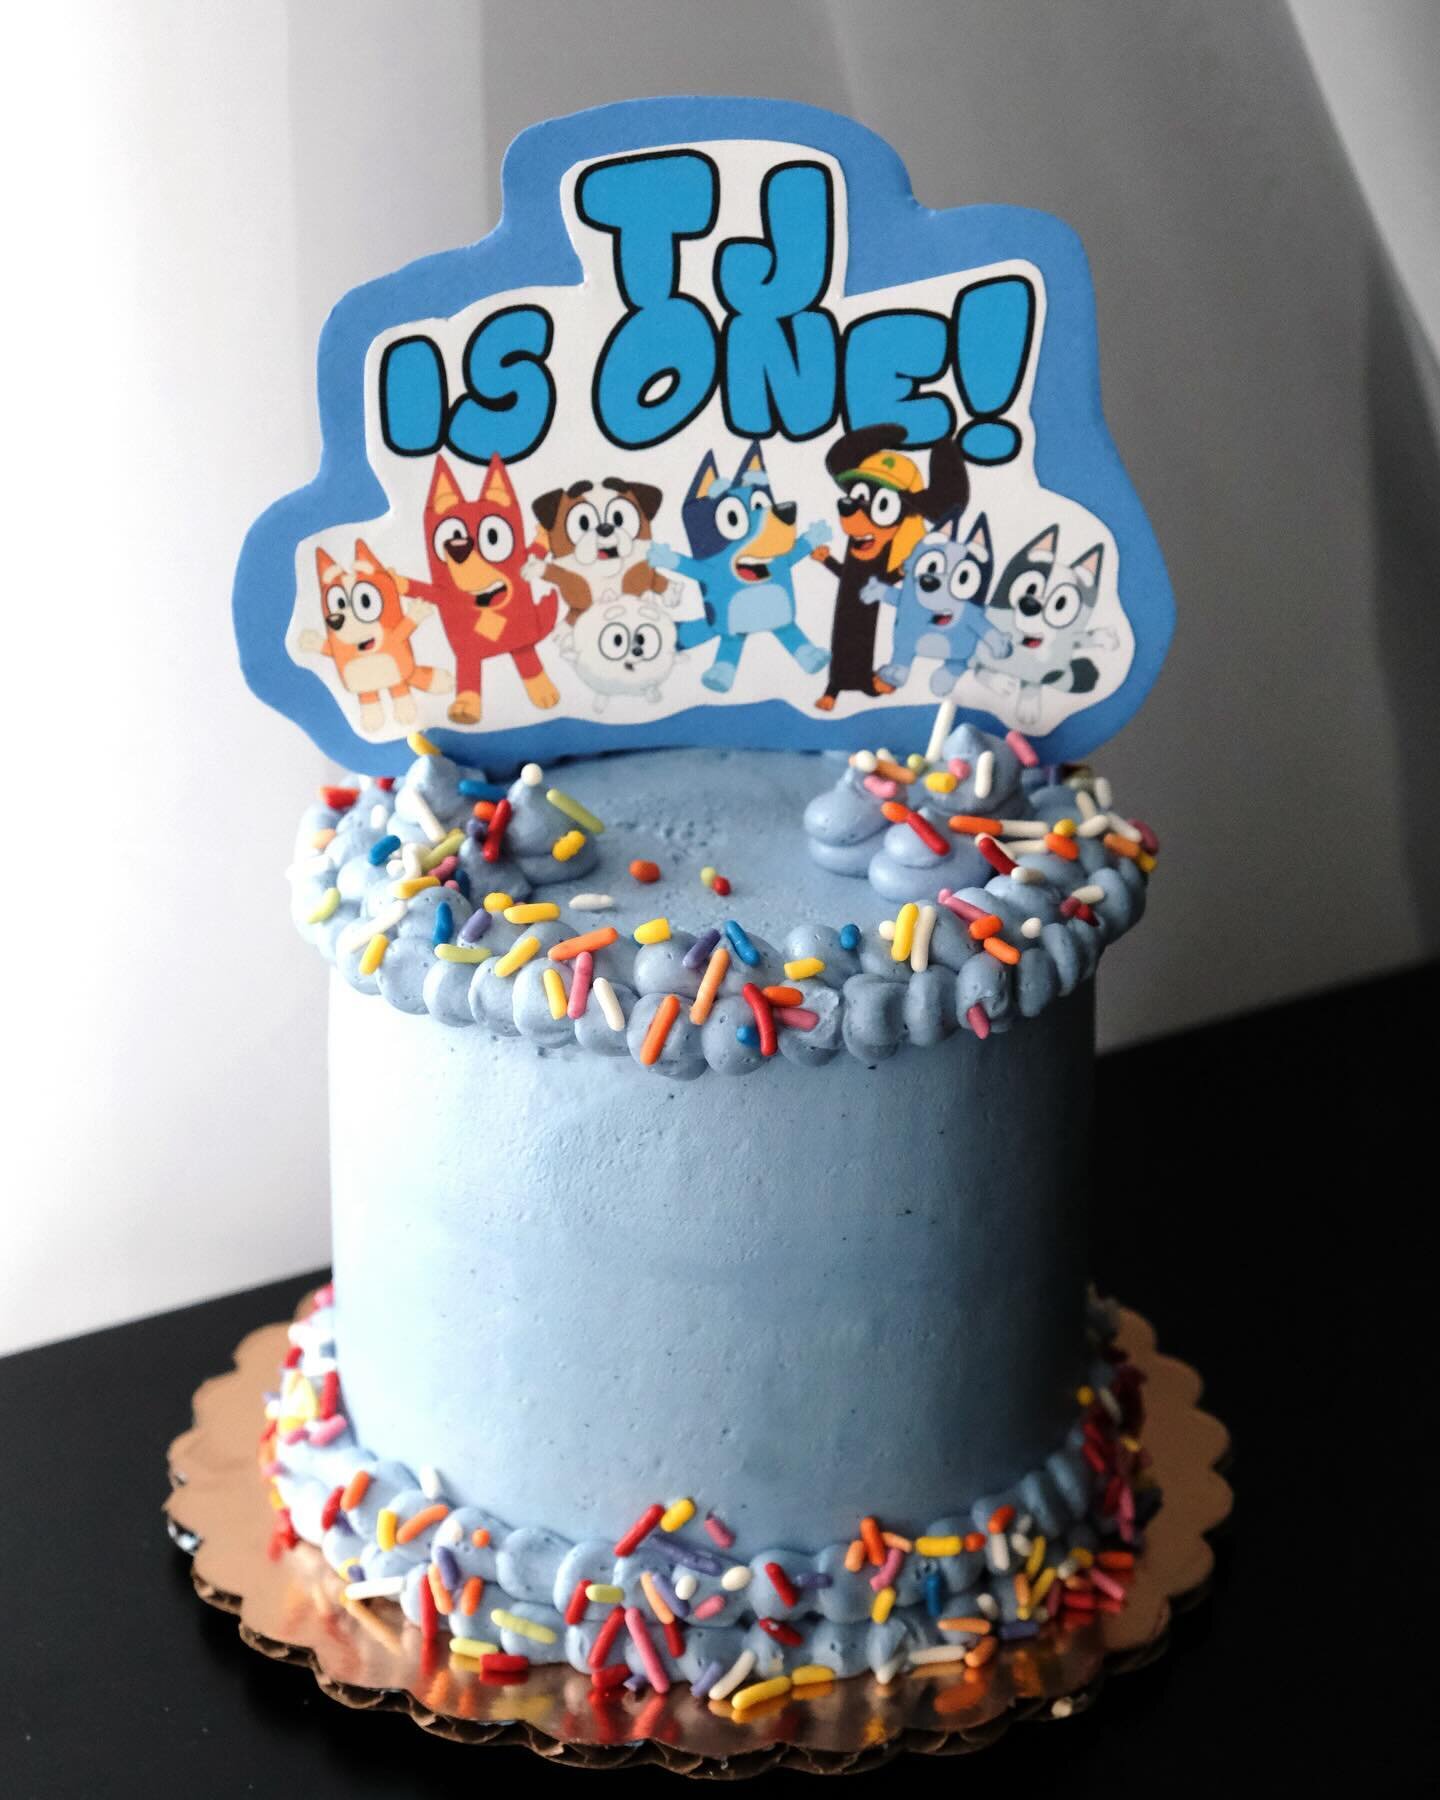 When you want your child&rsquo;s birthday to be nothing short of INCREDIBLE, but you&rsquo;re not quite sure where to begin... that&rsquo;s where we come in!

As a parent, you&rsquo;ve already won their heart, but with a custom cake devoted to their 